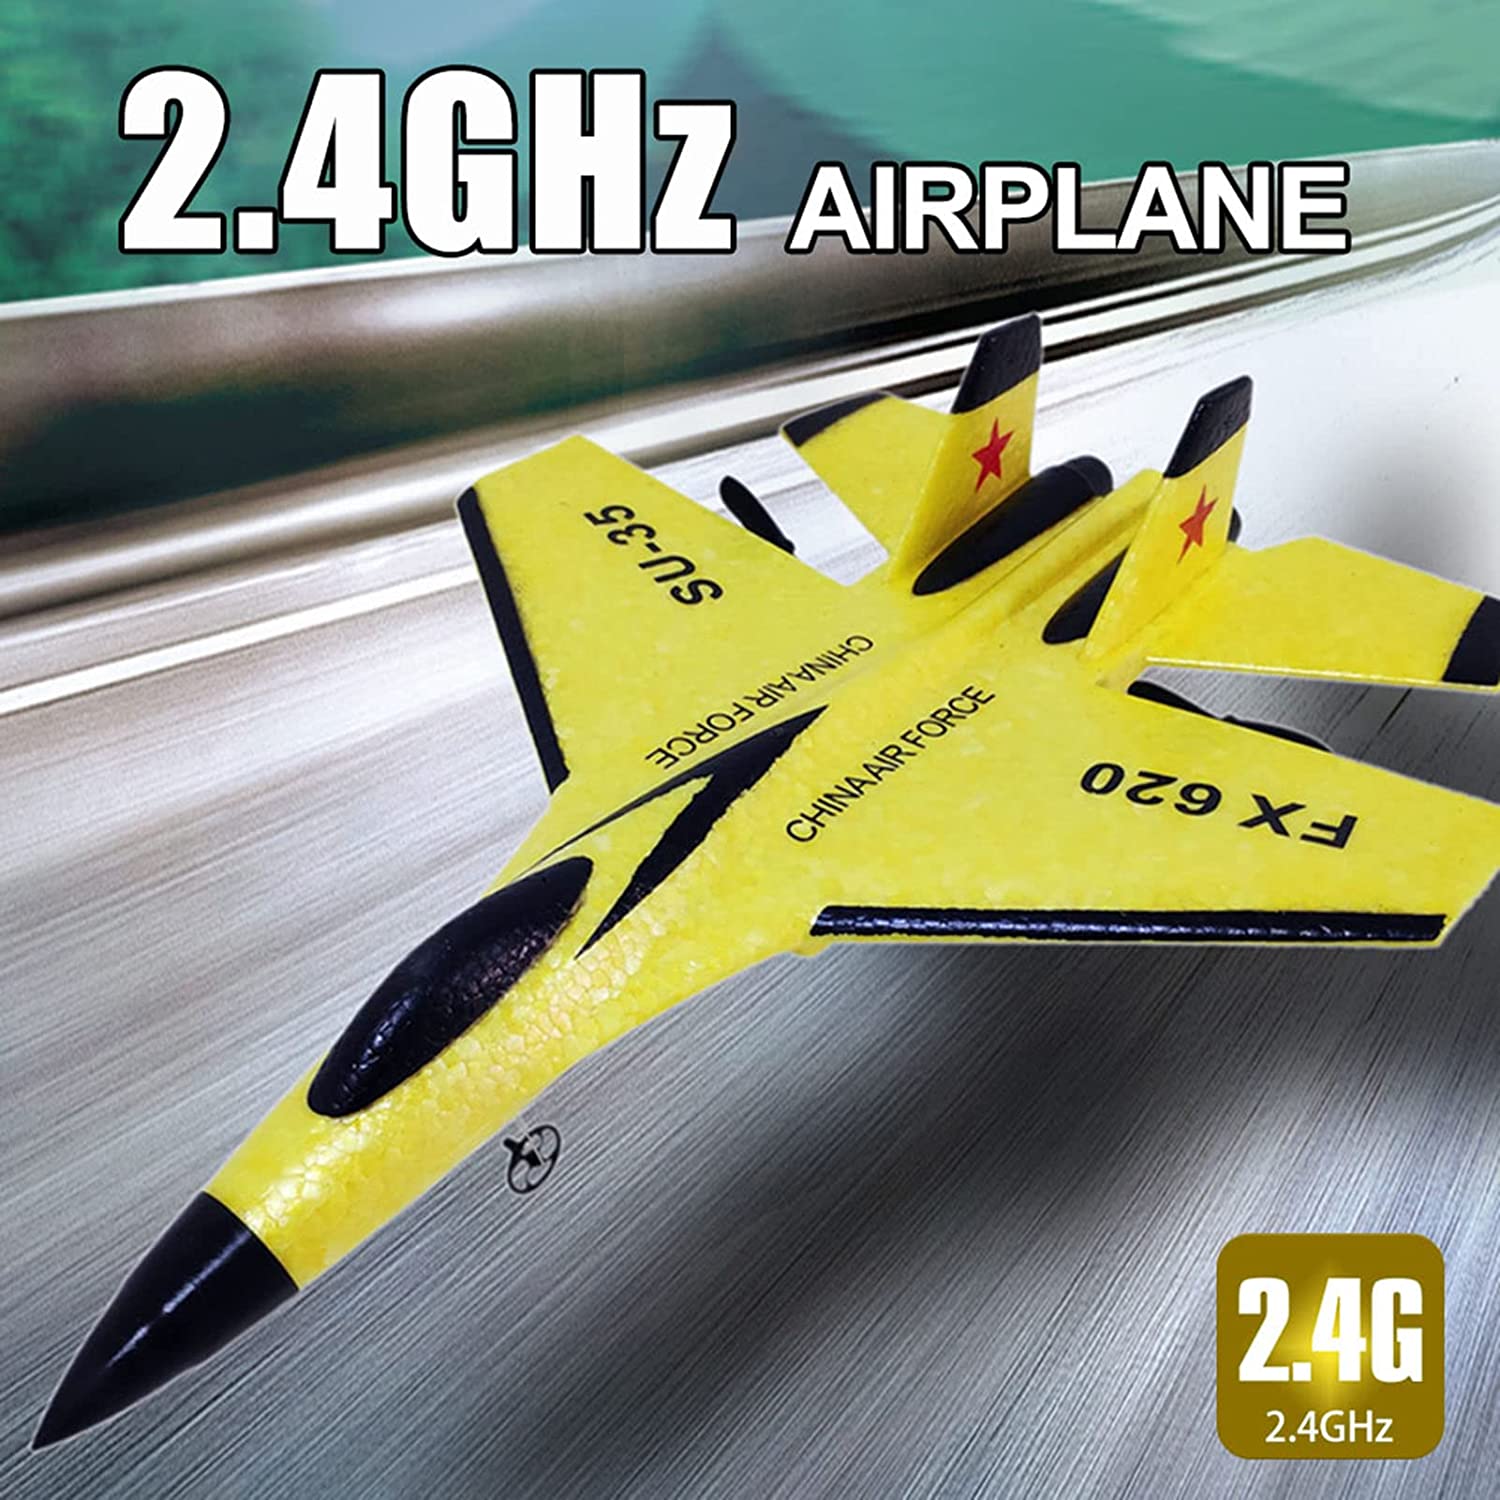 FX620 RC Airplane 2.4GHz Remote Control Airplane SU-35Pro RC Glider EPP Aircraft Model Outdoor Flight Toys for Kids Adults